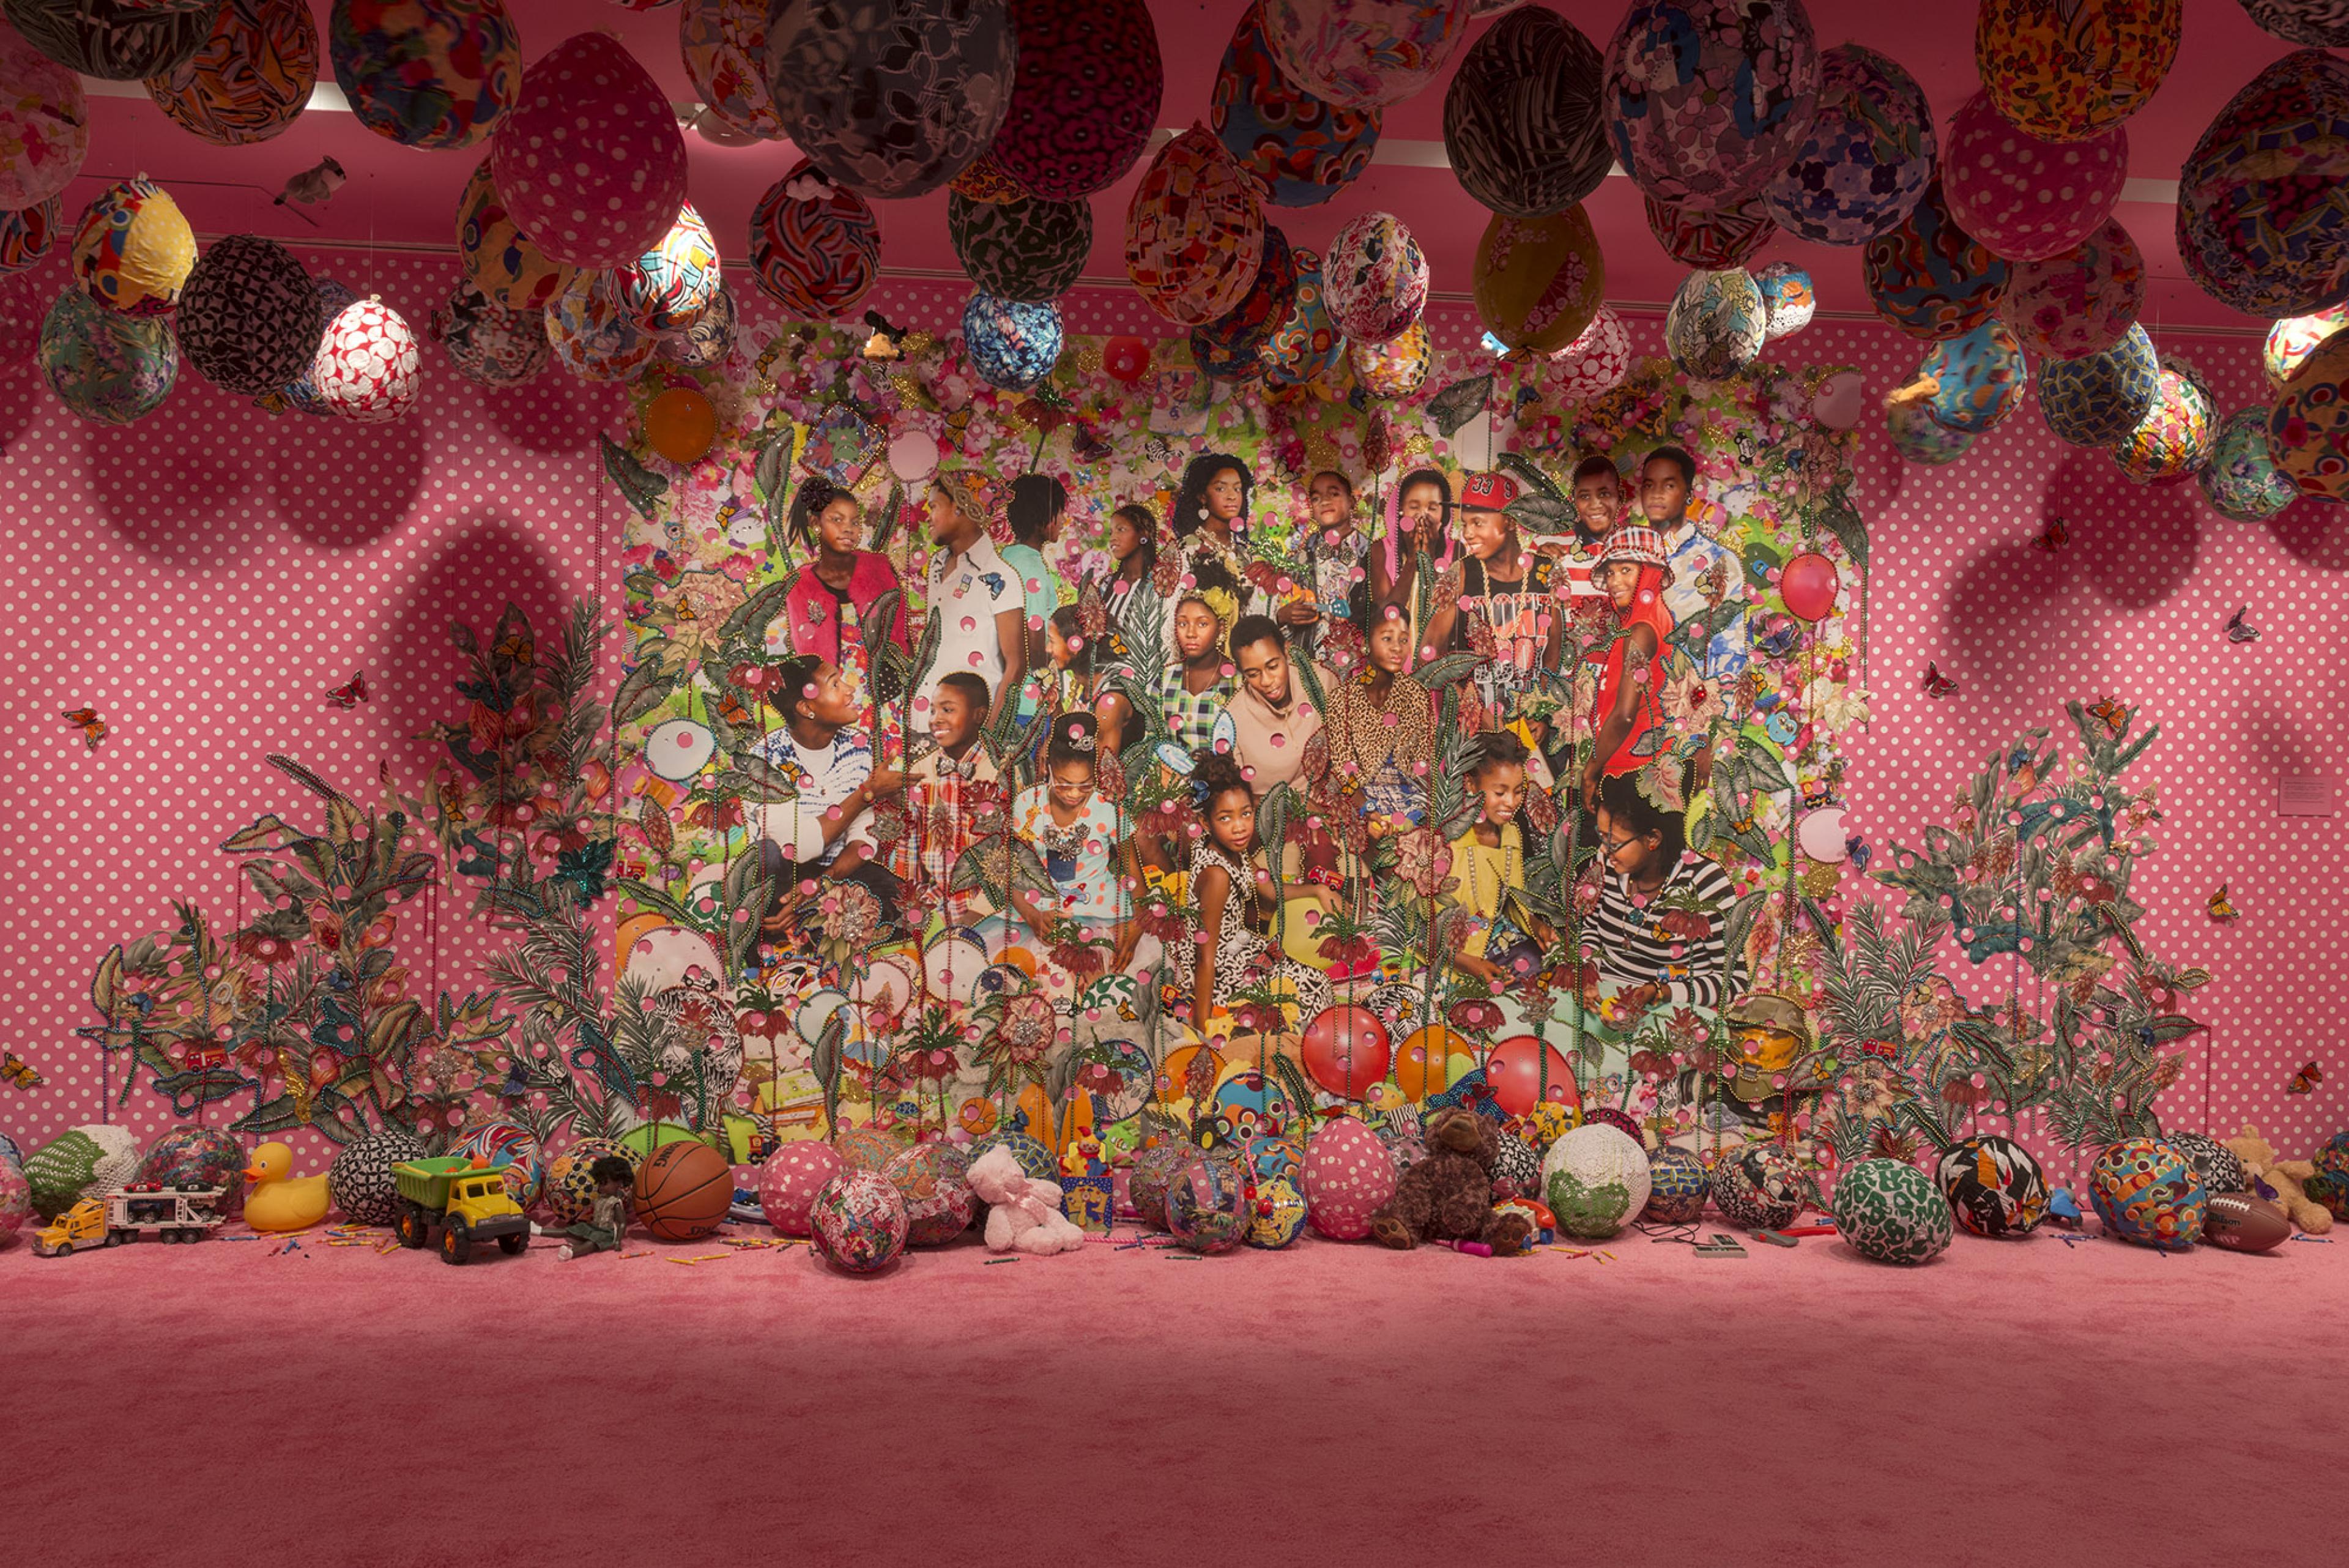 an art installation against a pink wall with a collage of photos of black children as well as mardi gras beads, balloons and teddy bears